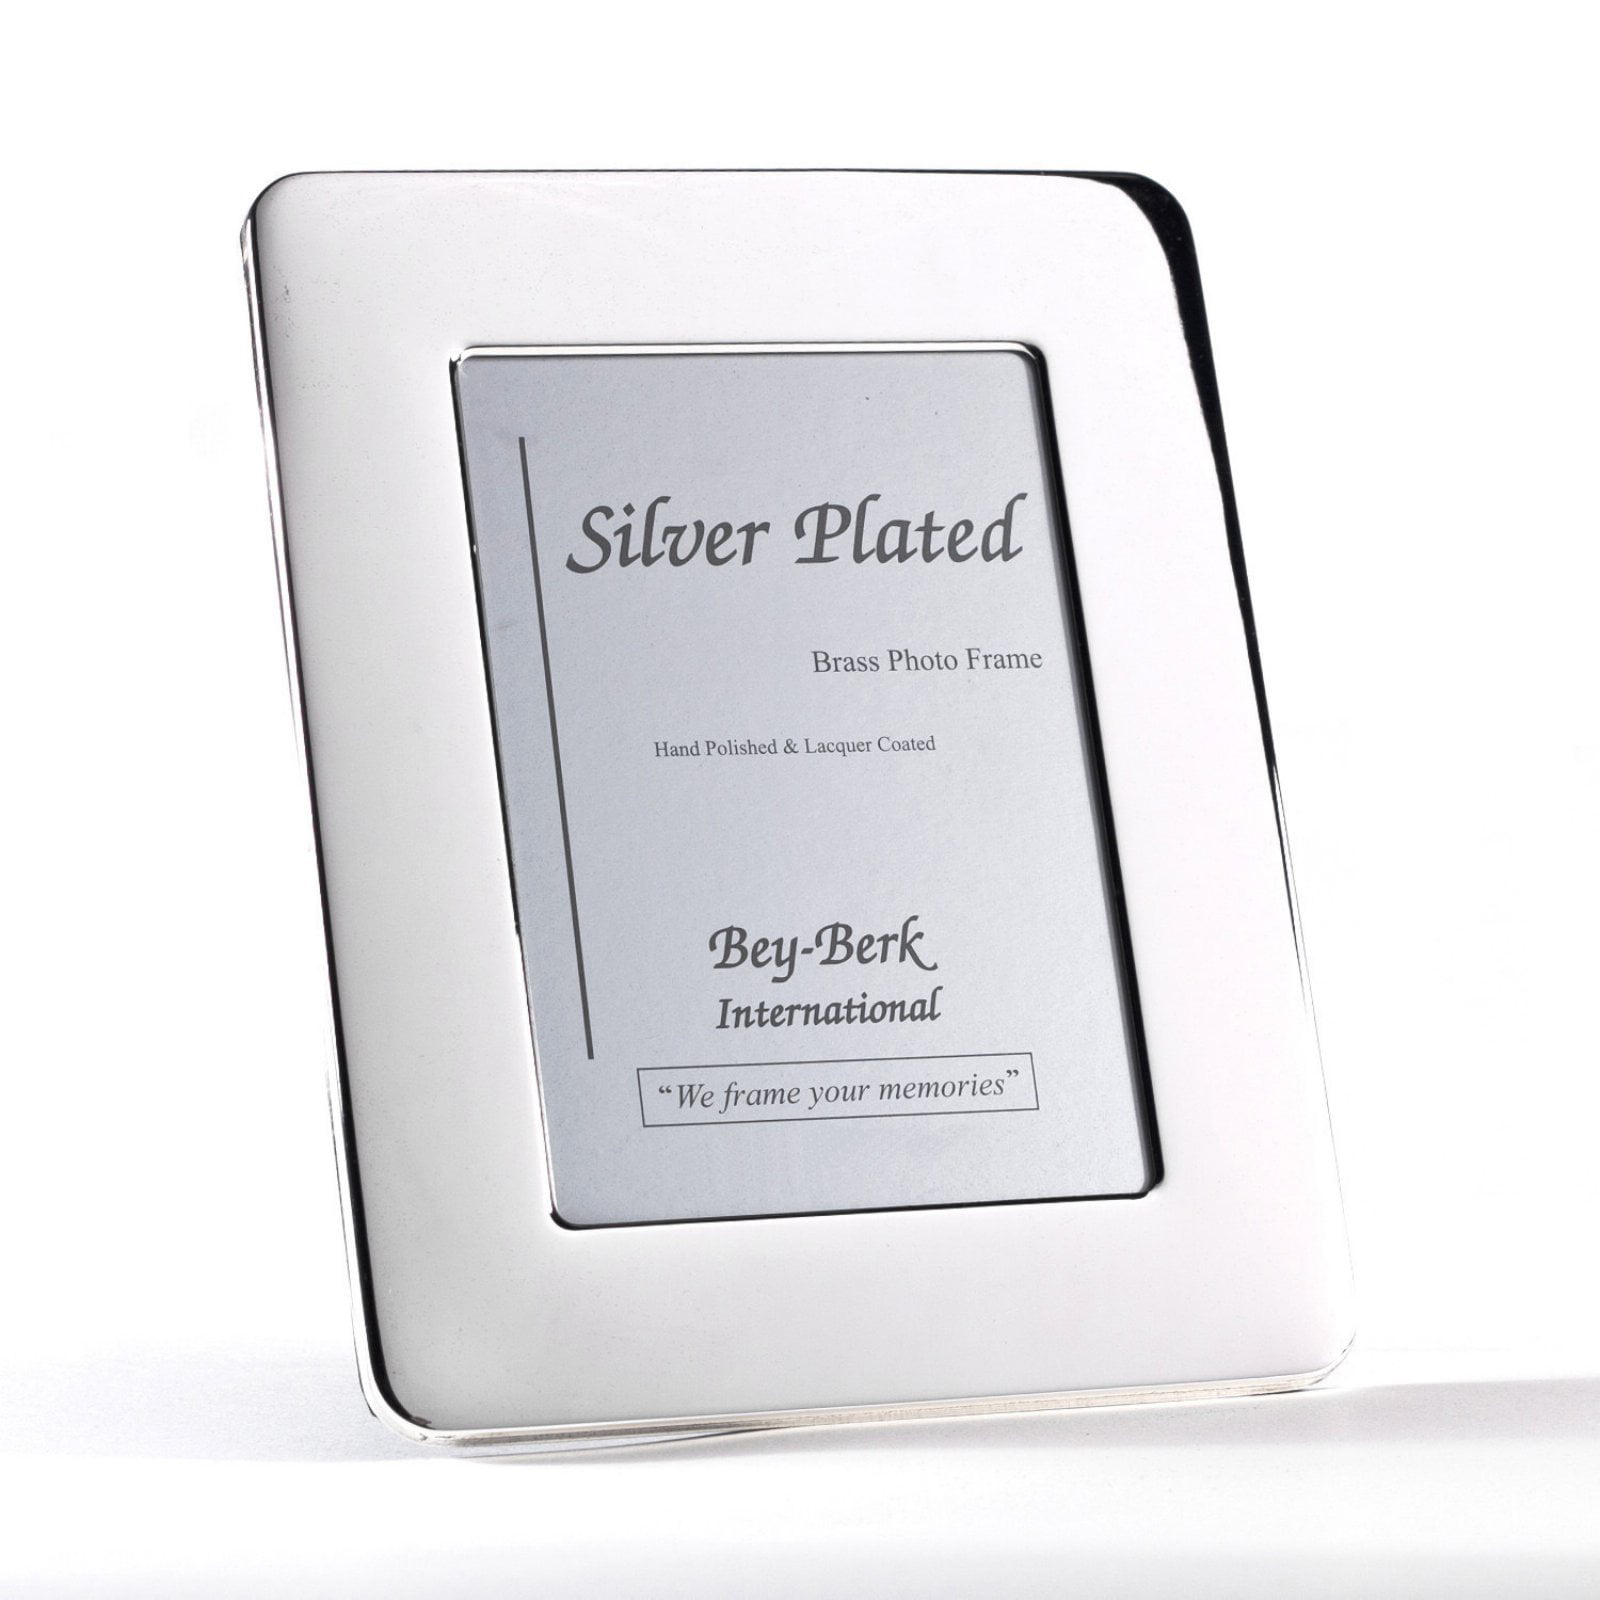 SILVER PLATED HAND POLISHED LCAQUER COATED PHOTO FRAME BLACK SILVER DESIGN 